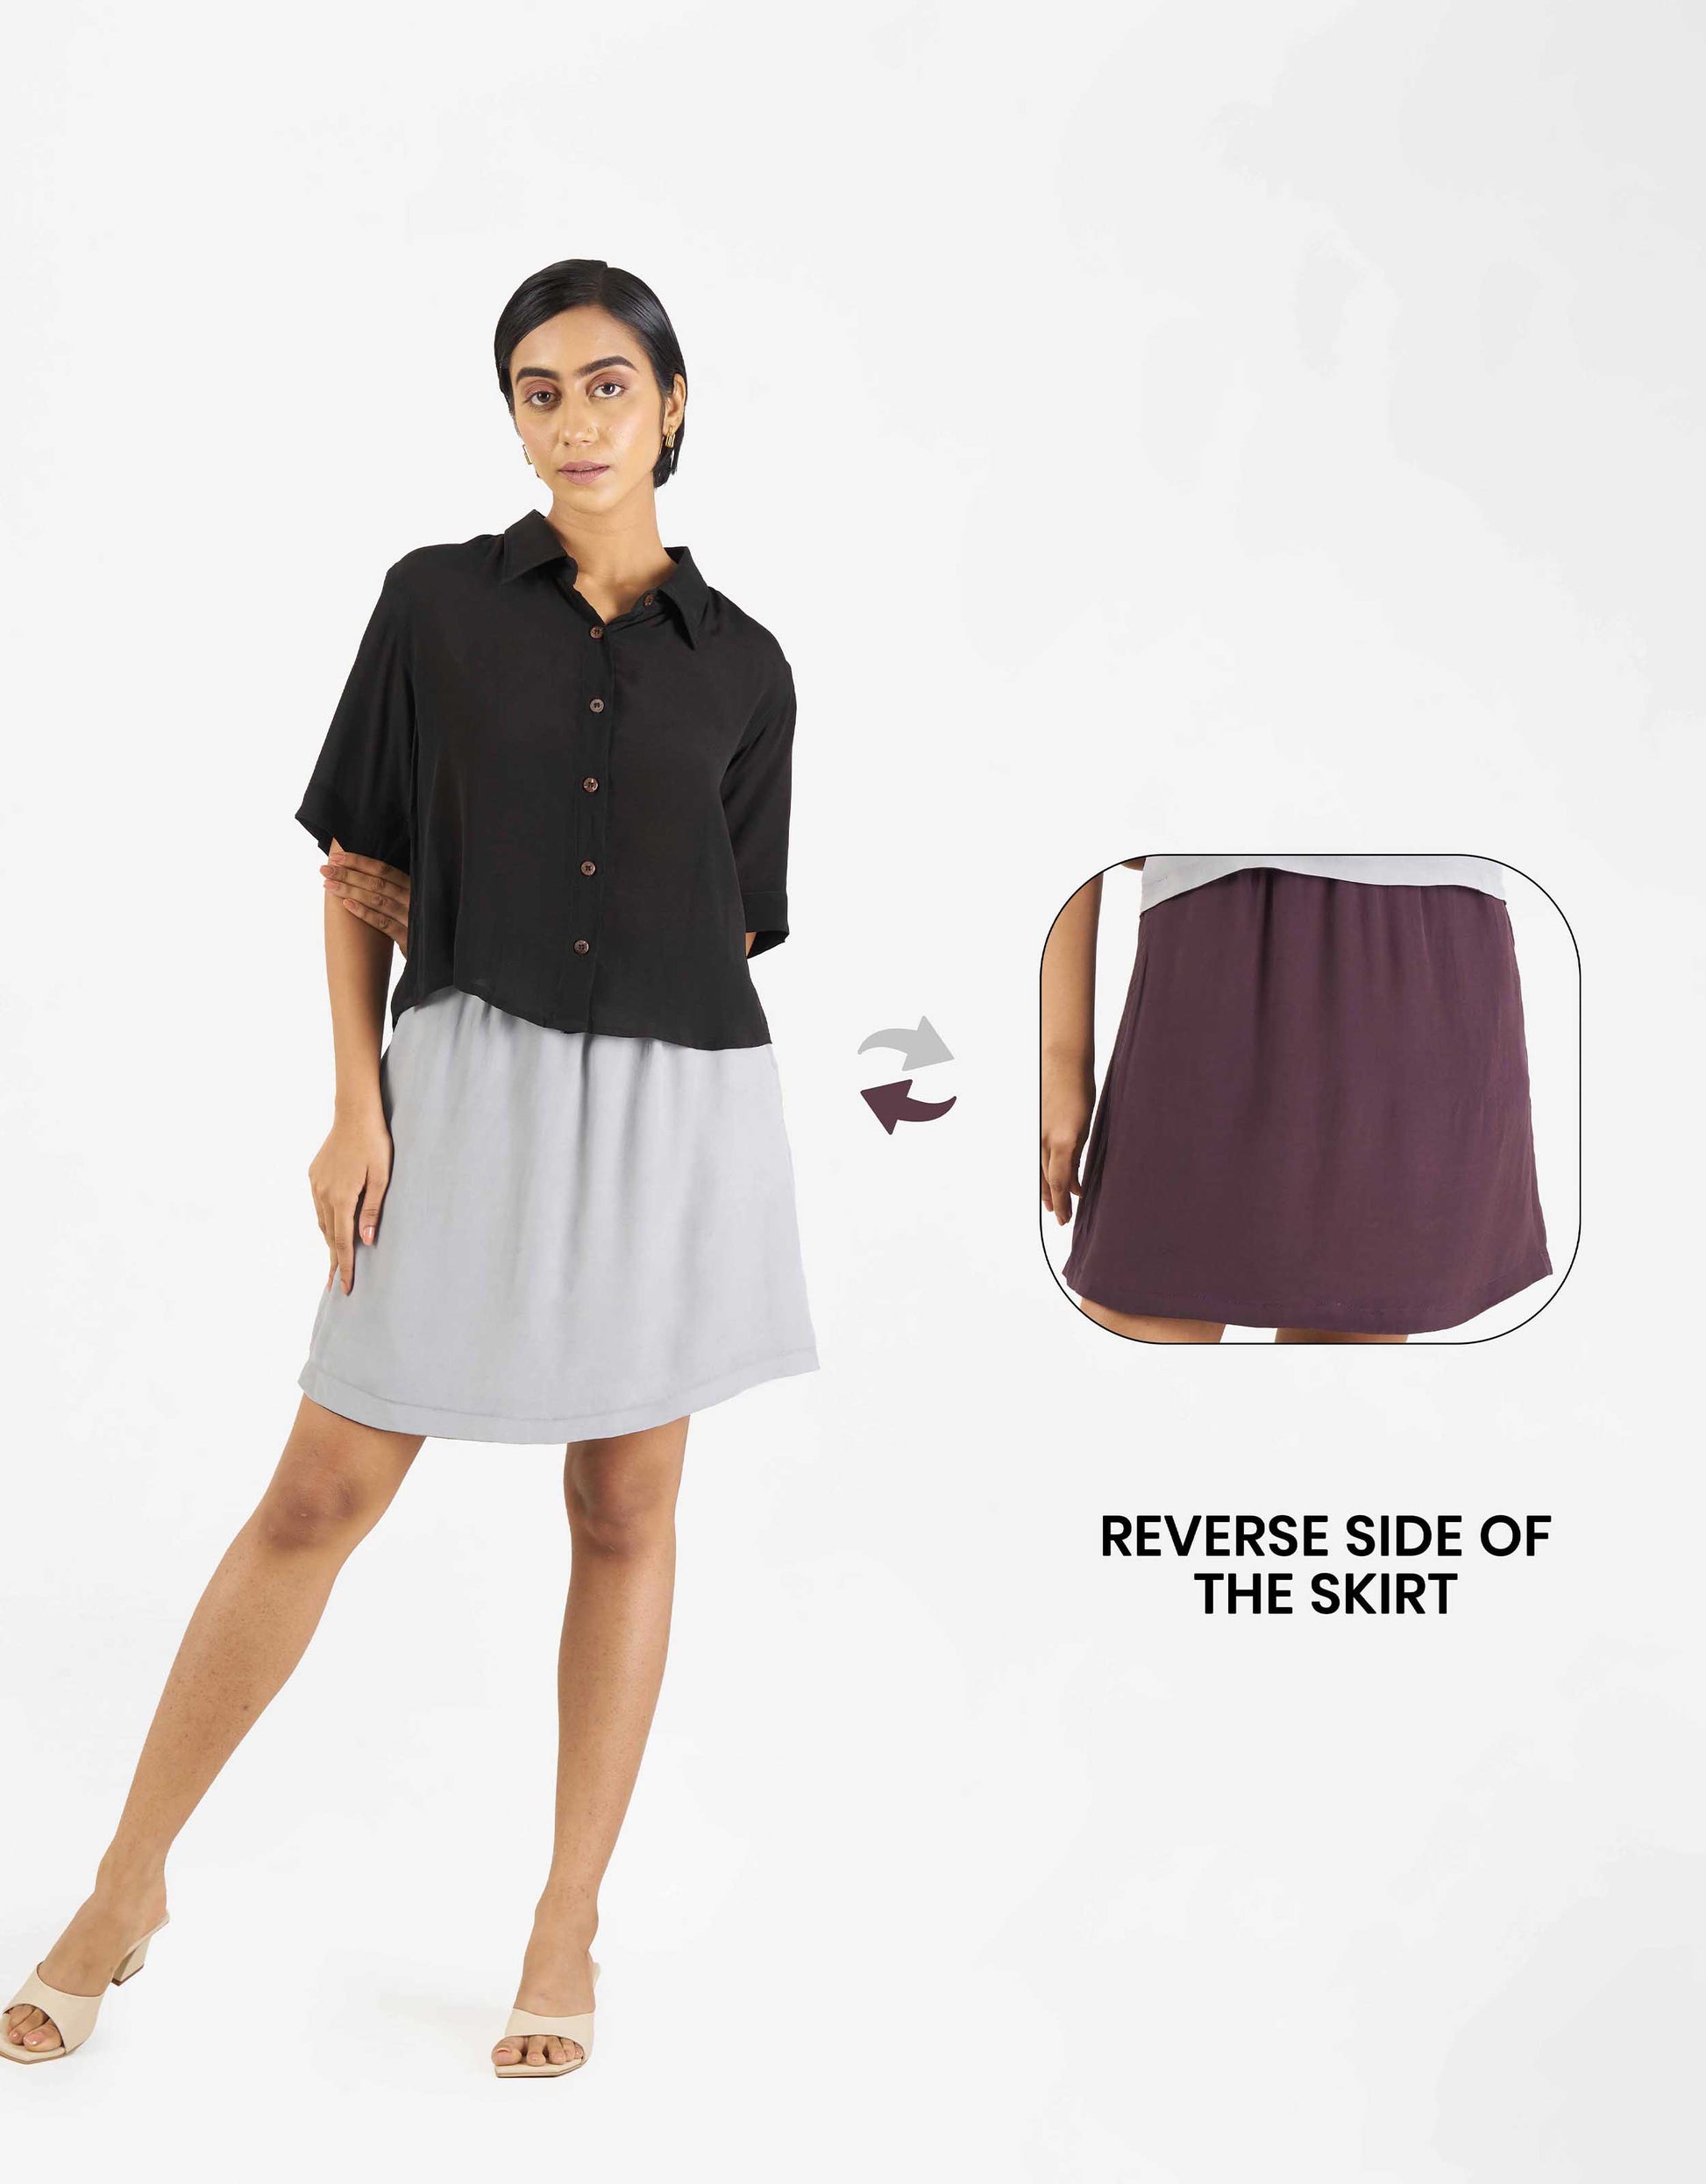 Front view of Hueloom's star-ter capsule with boxy shirt and skirt in black, purple and grey with reverse side.